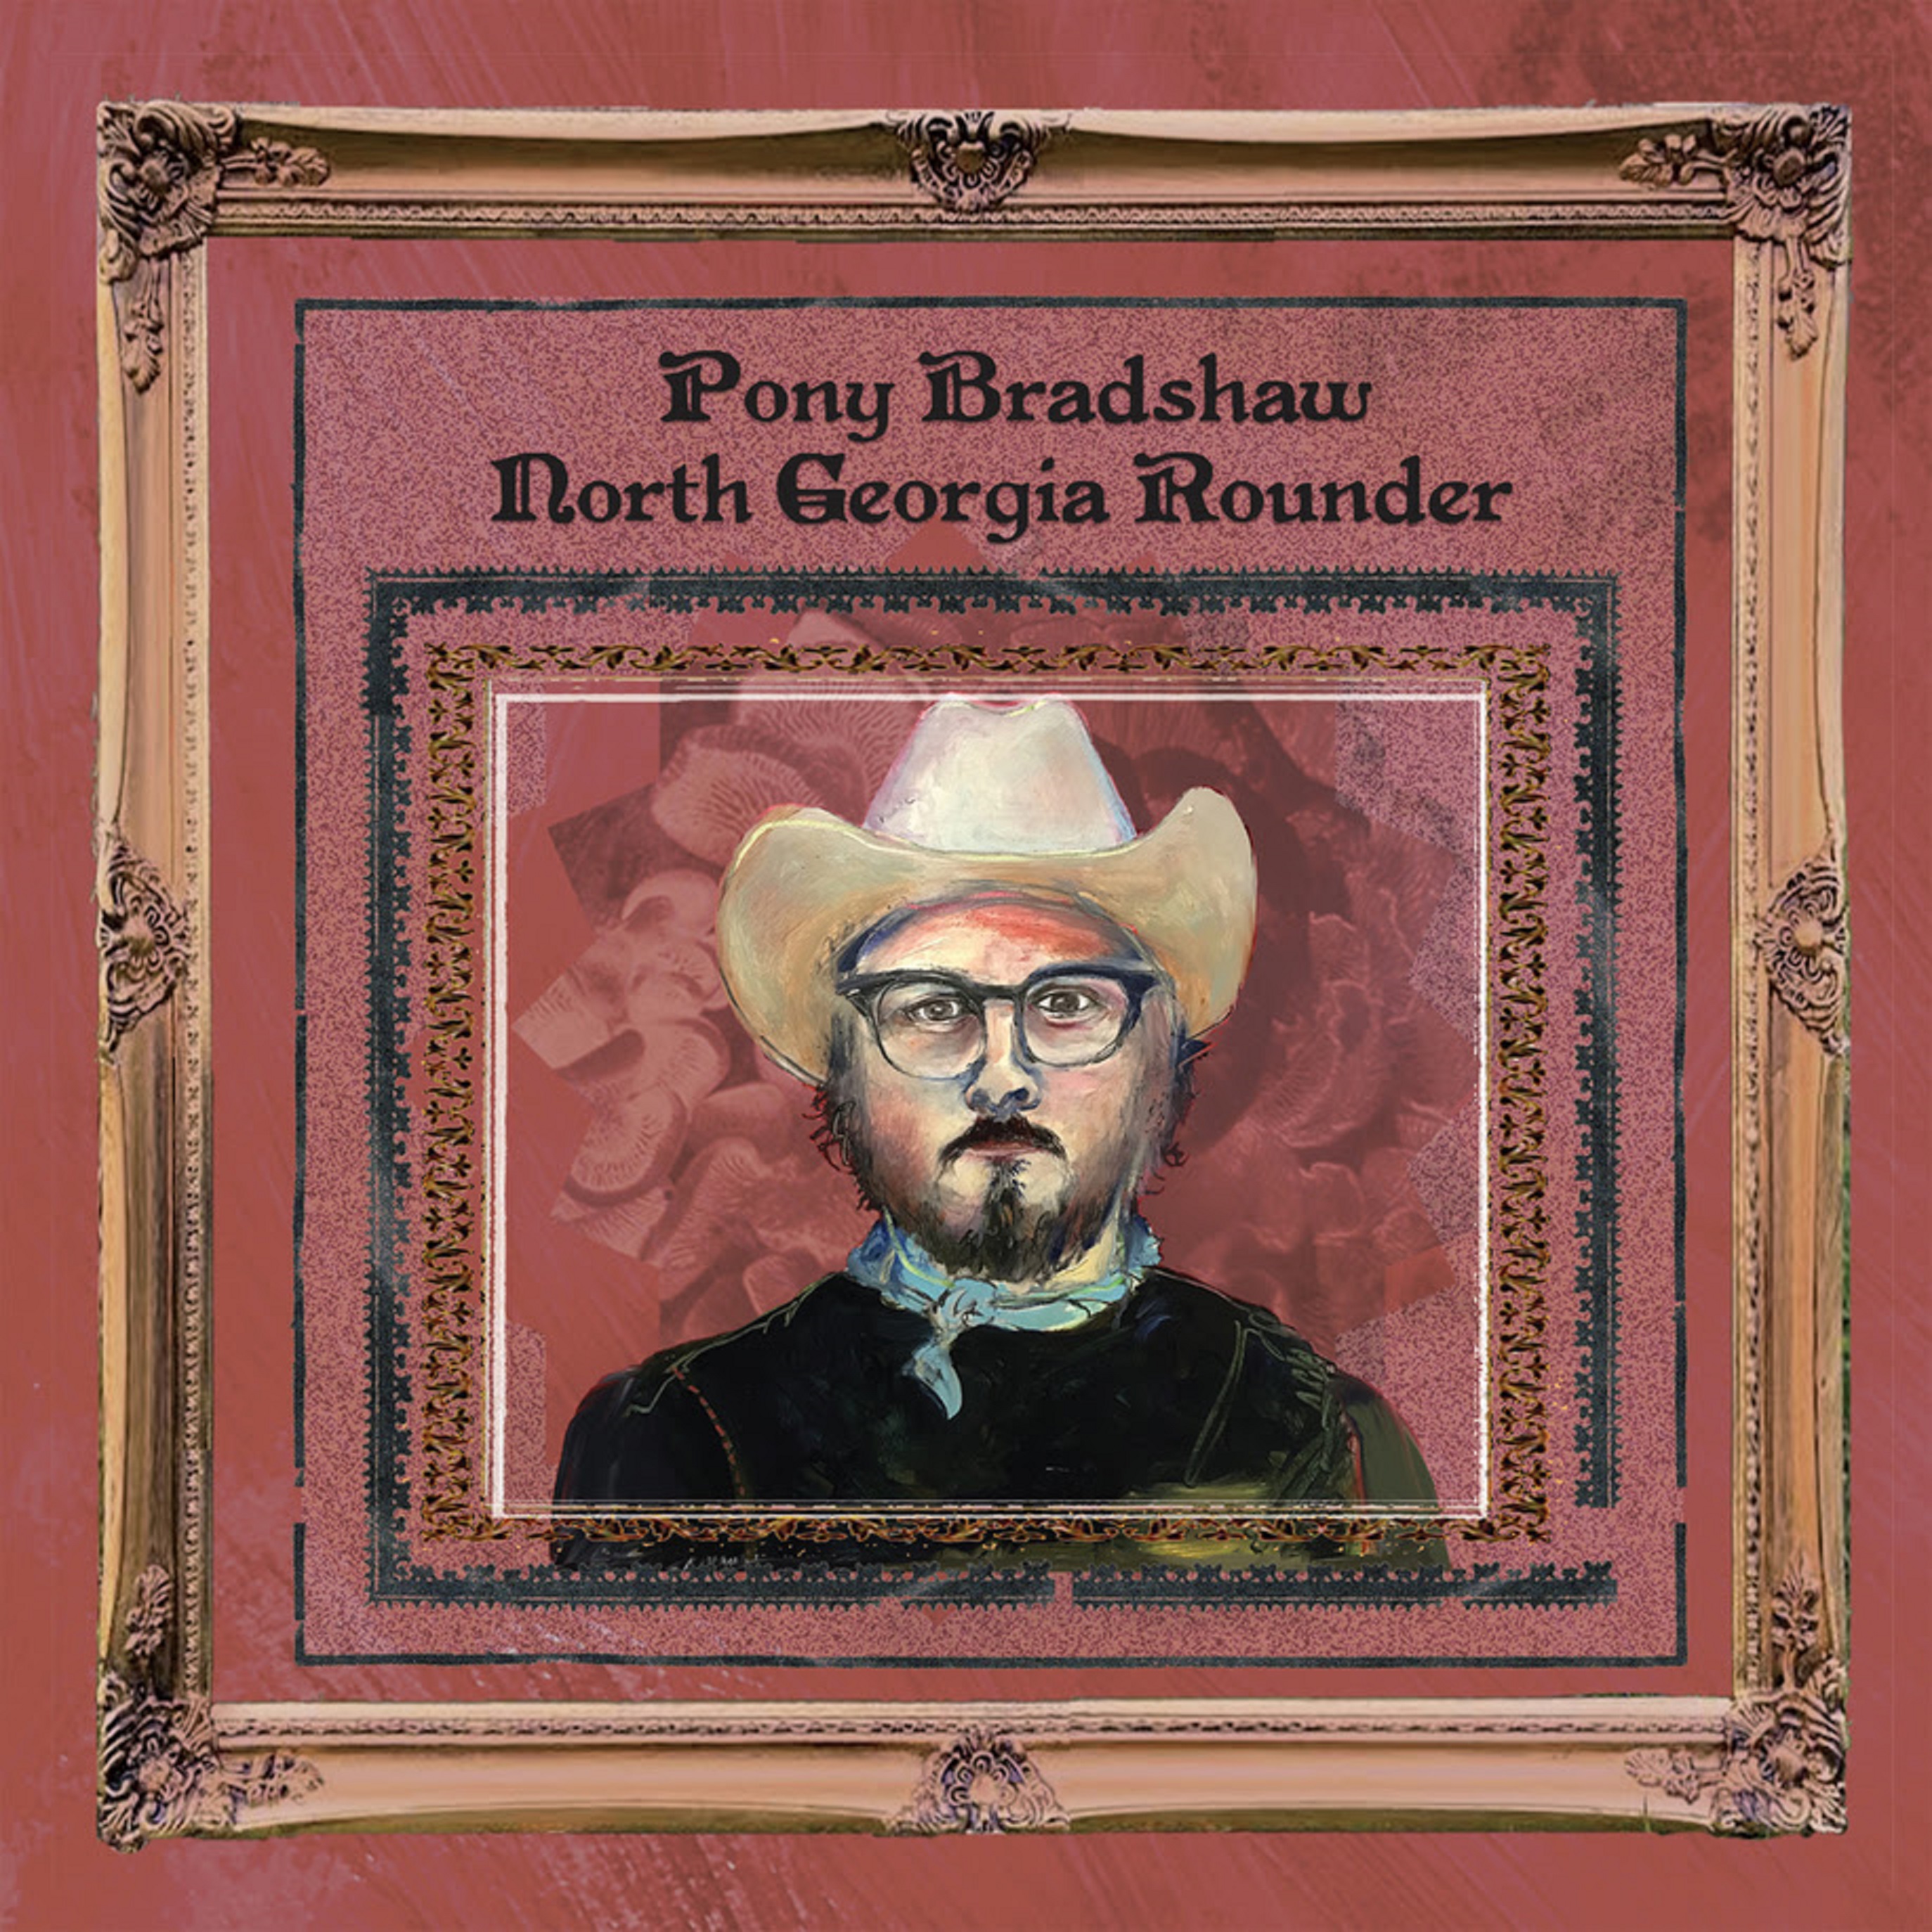 PONY BRADSHAW RELEASES TWO NEW TRACKS “KINDLY TURN THE BED DOWN, DRUSILLA” AND “NOTES ON A RIVER TOWN”